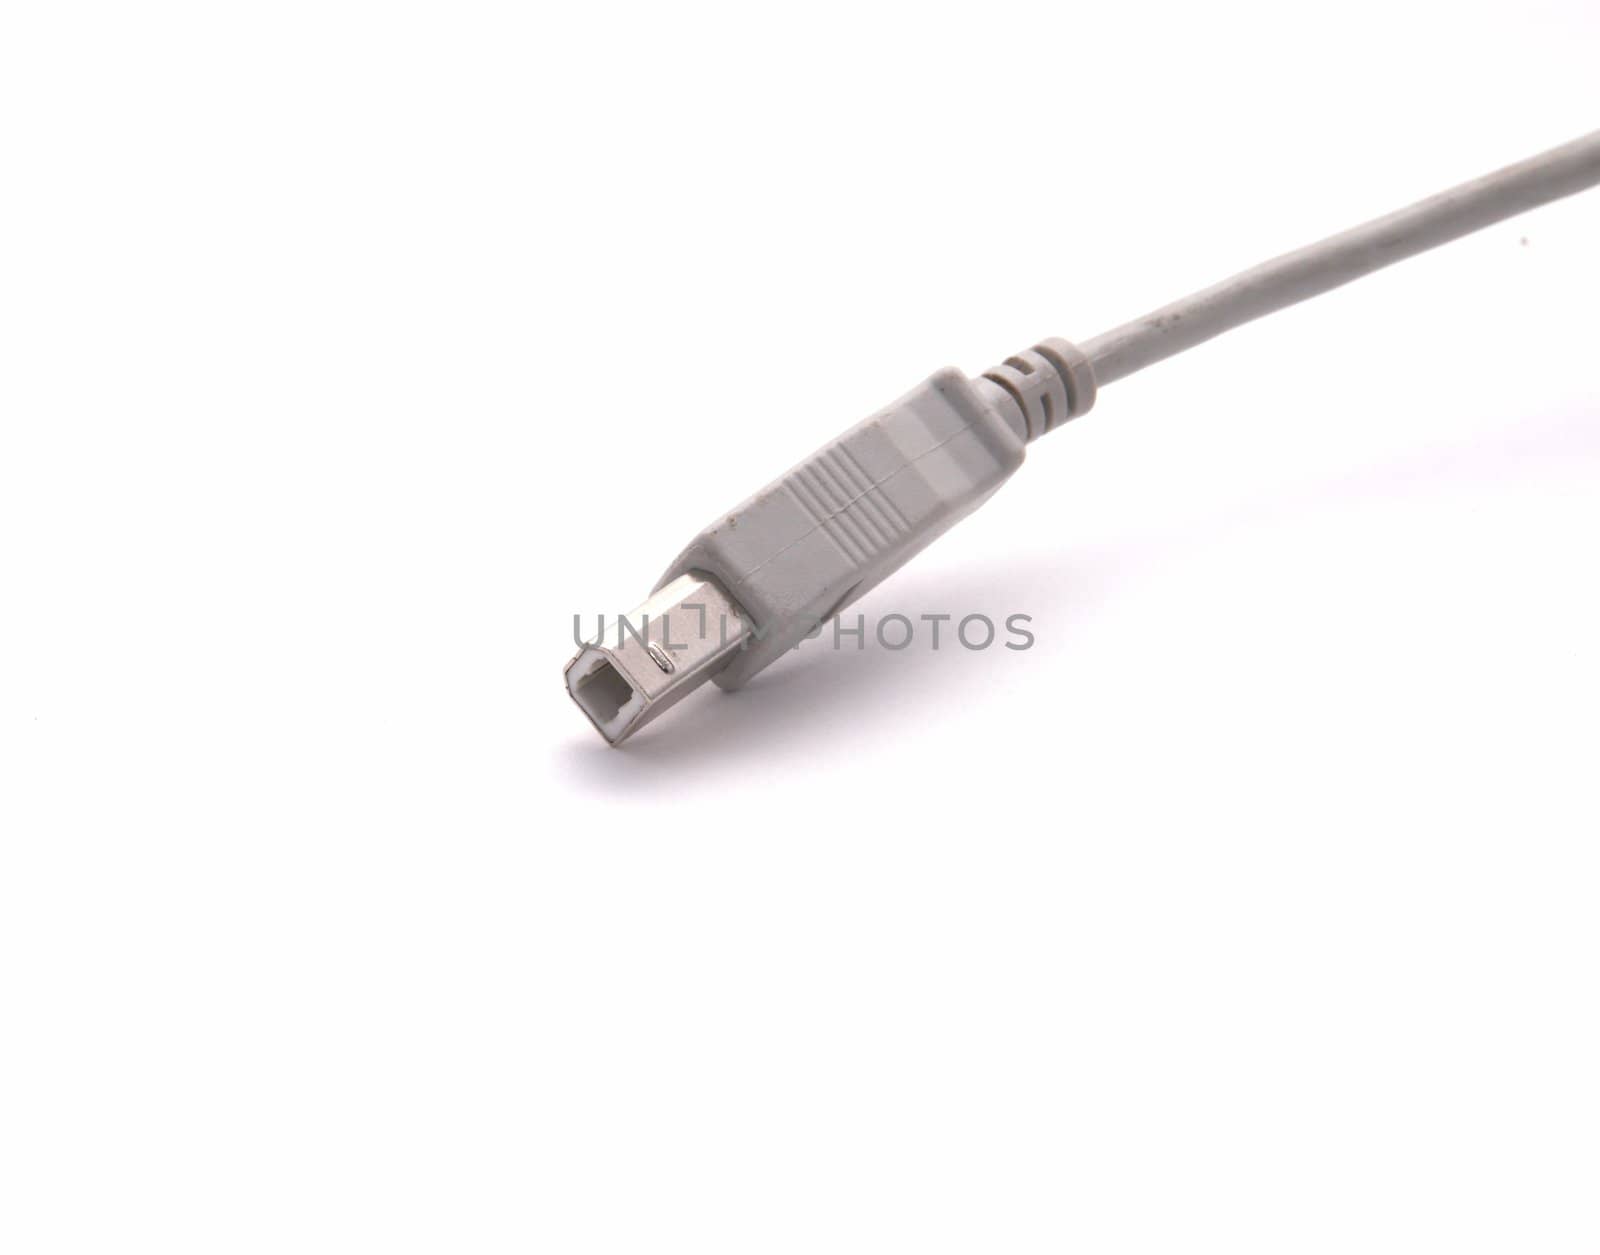 USB connector on a white background